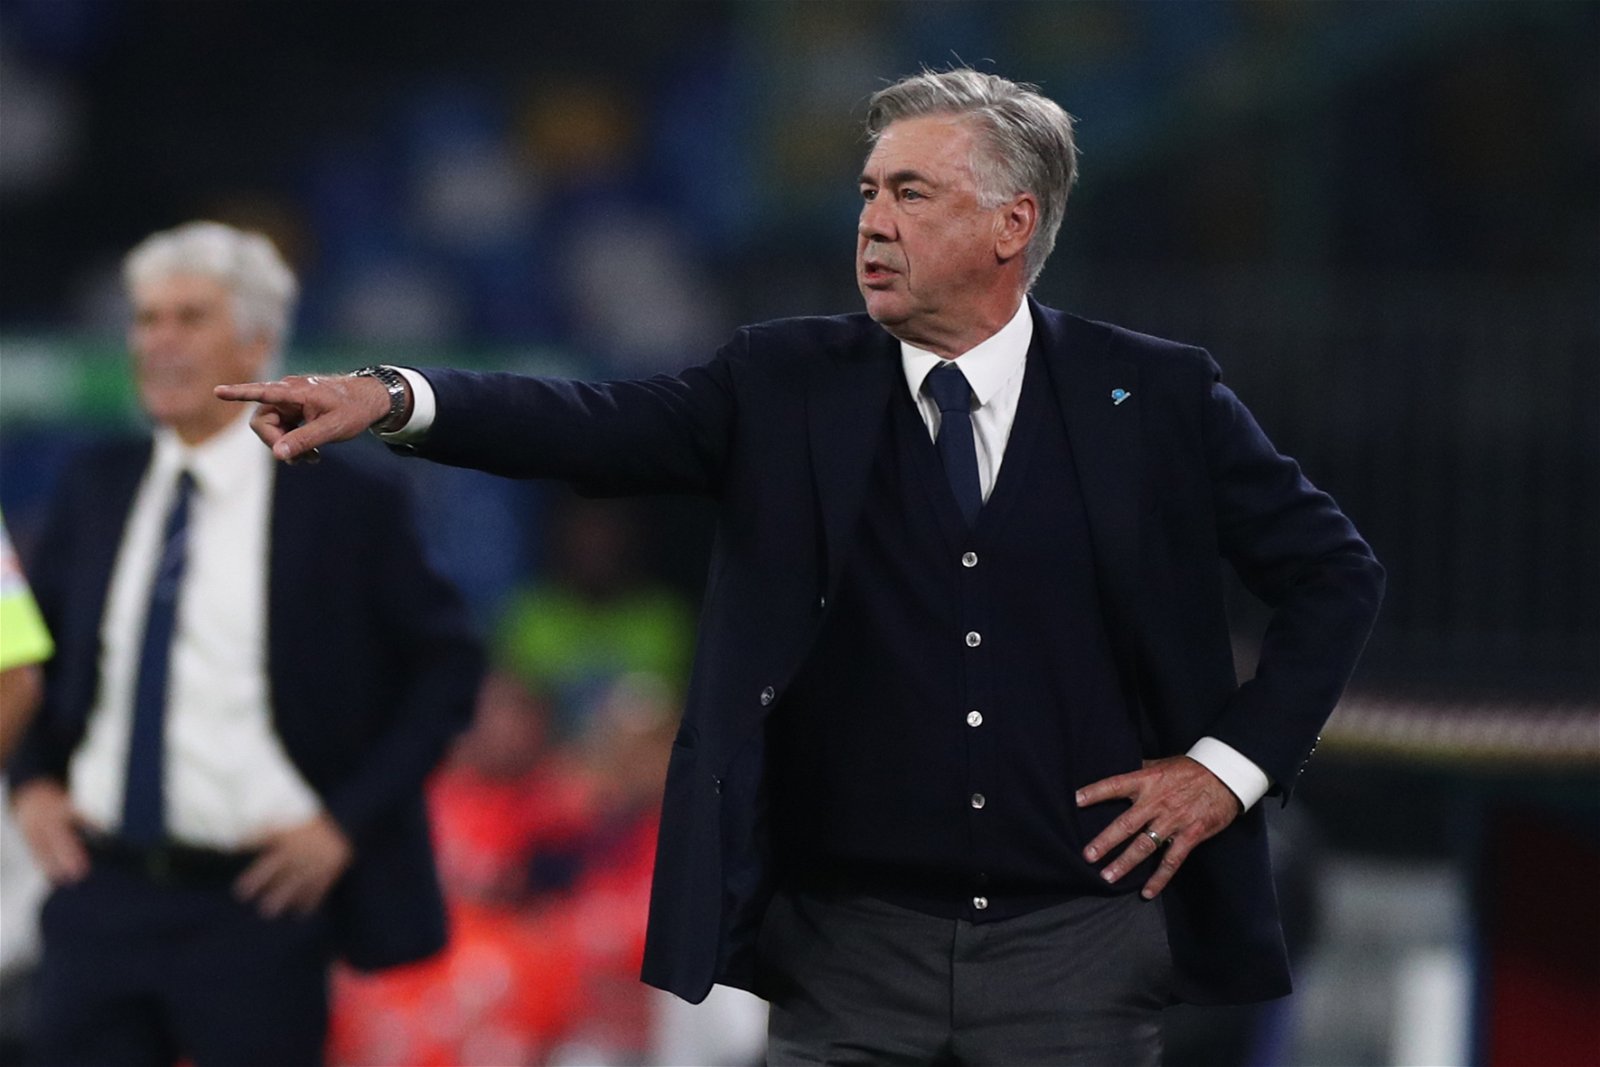 Napoli boss Carlo Ancelotti upset with officials for late send off against Atalanta